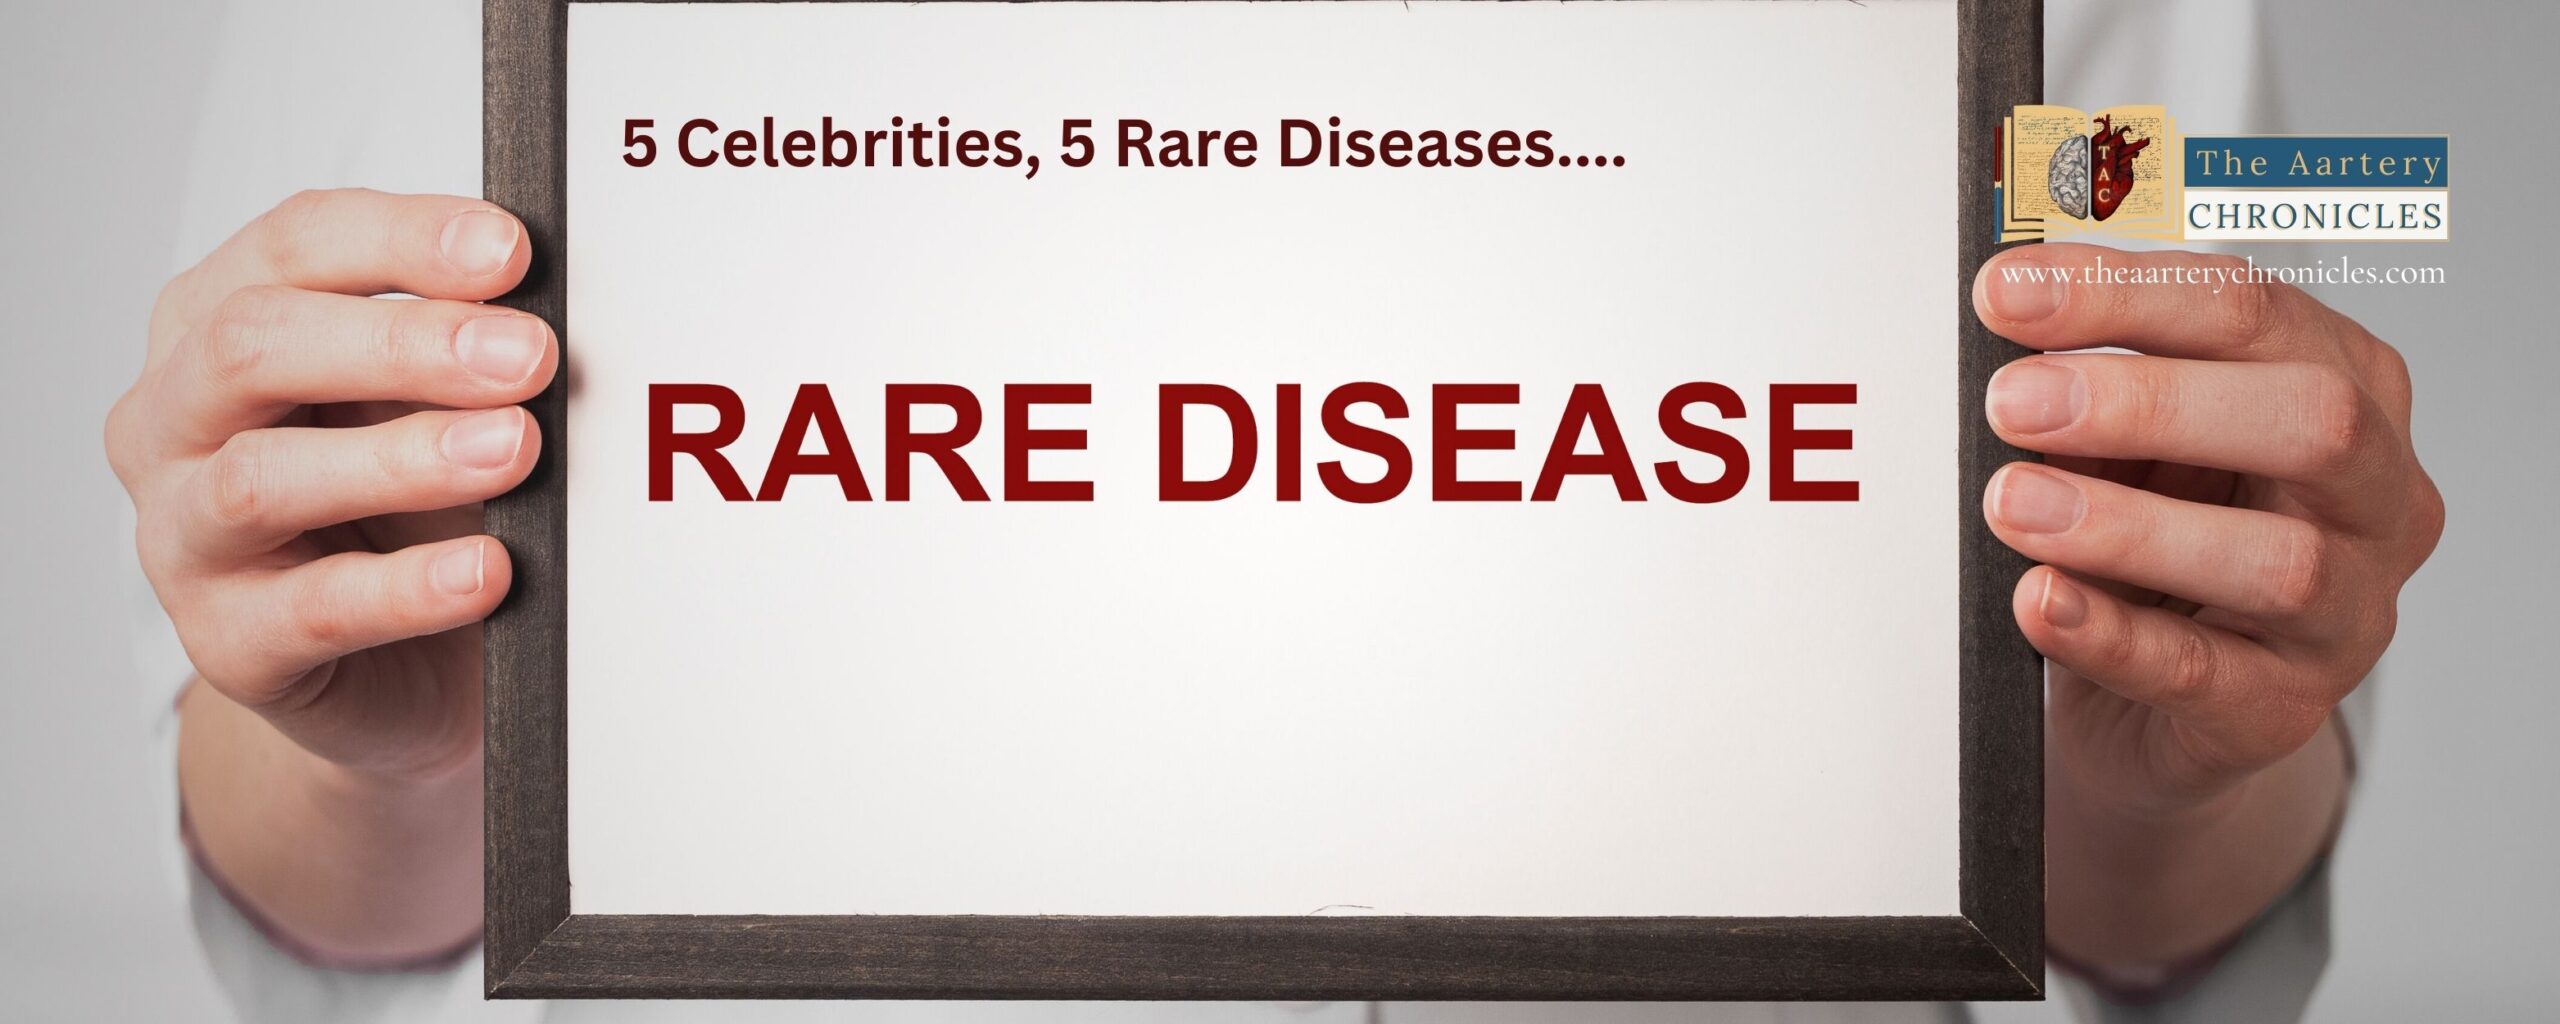 Rare Diseases Unveiled: Inspiring Stories of 5 Celebrities’ Resilience